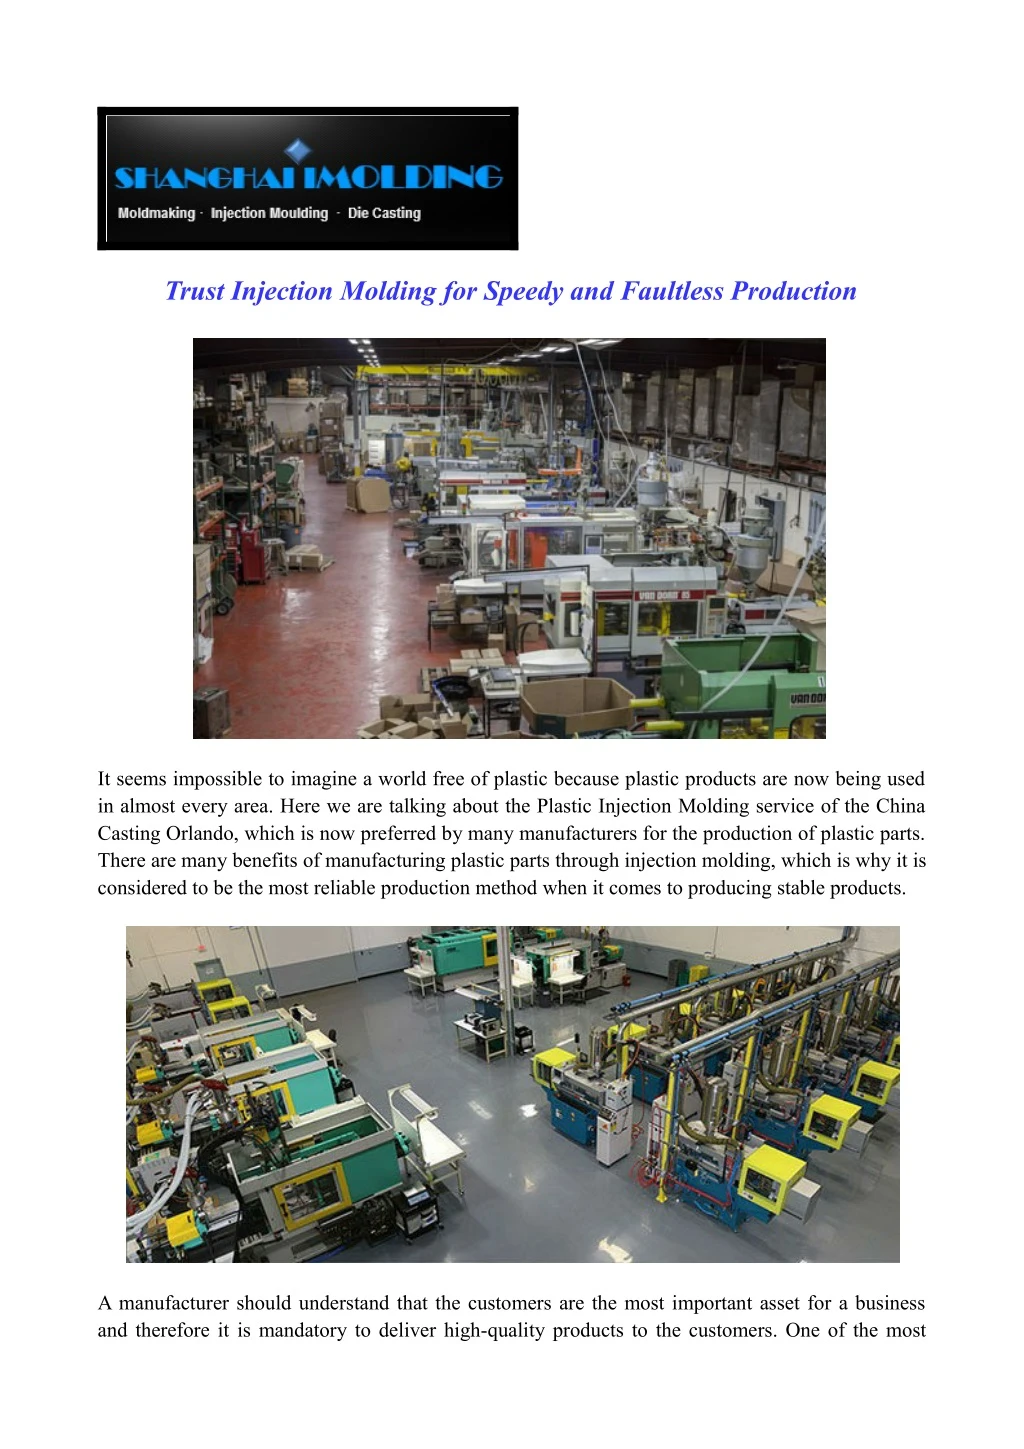 trust injection molding for speedy and faultless